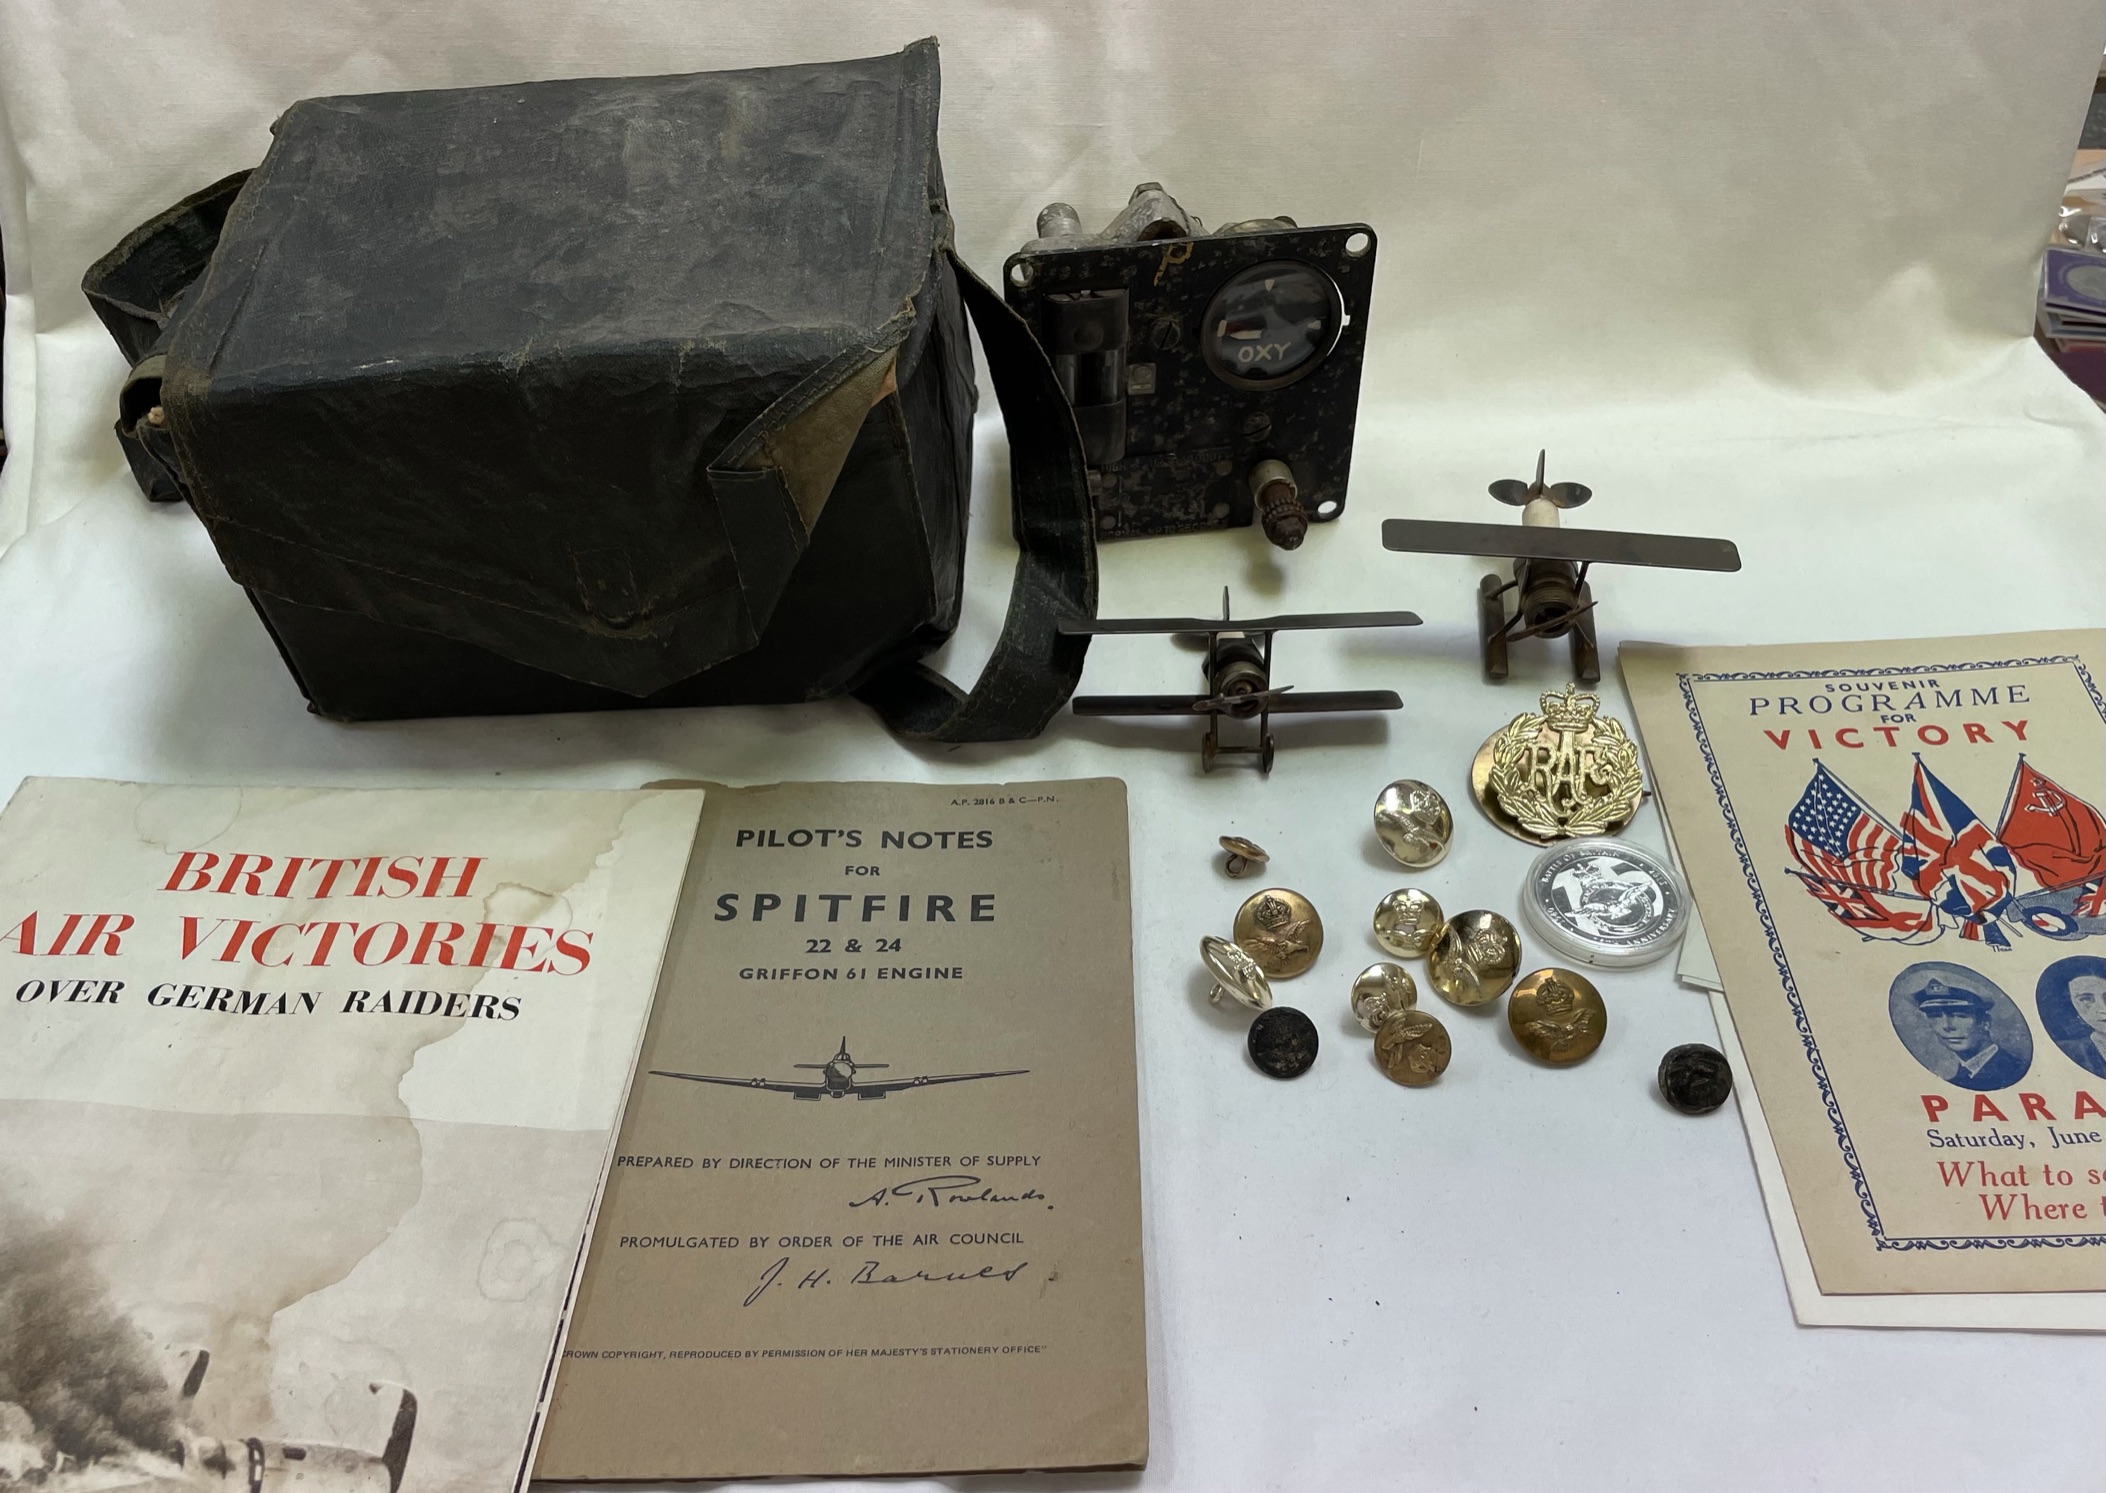 An oxygen regulator, probably from a spitfire together with model planes made from spark plugs,